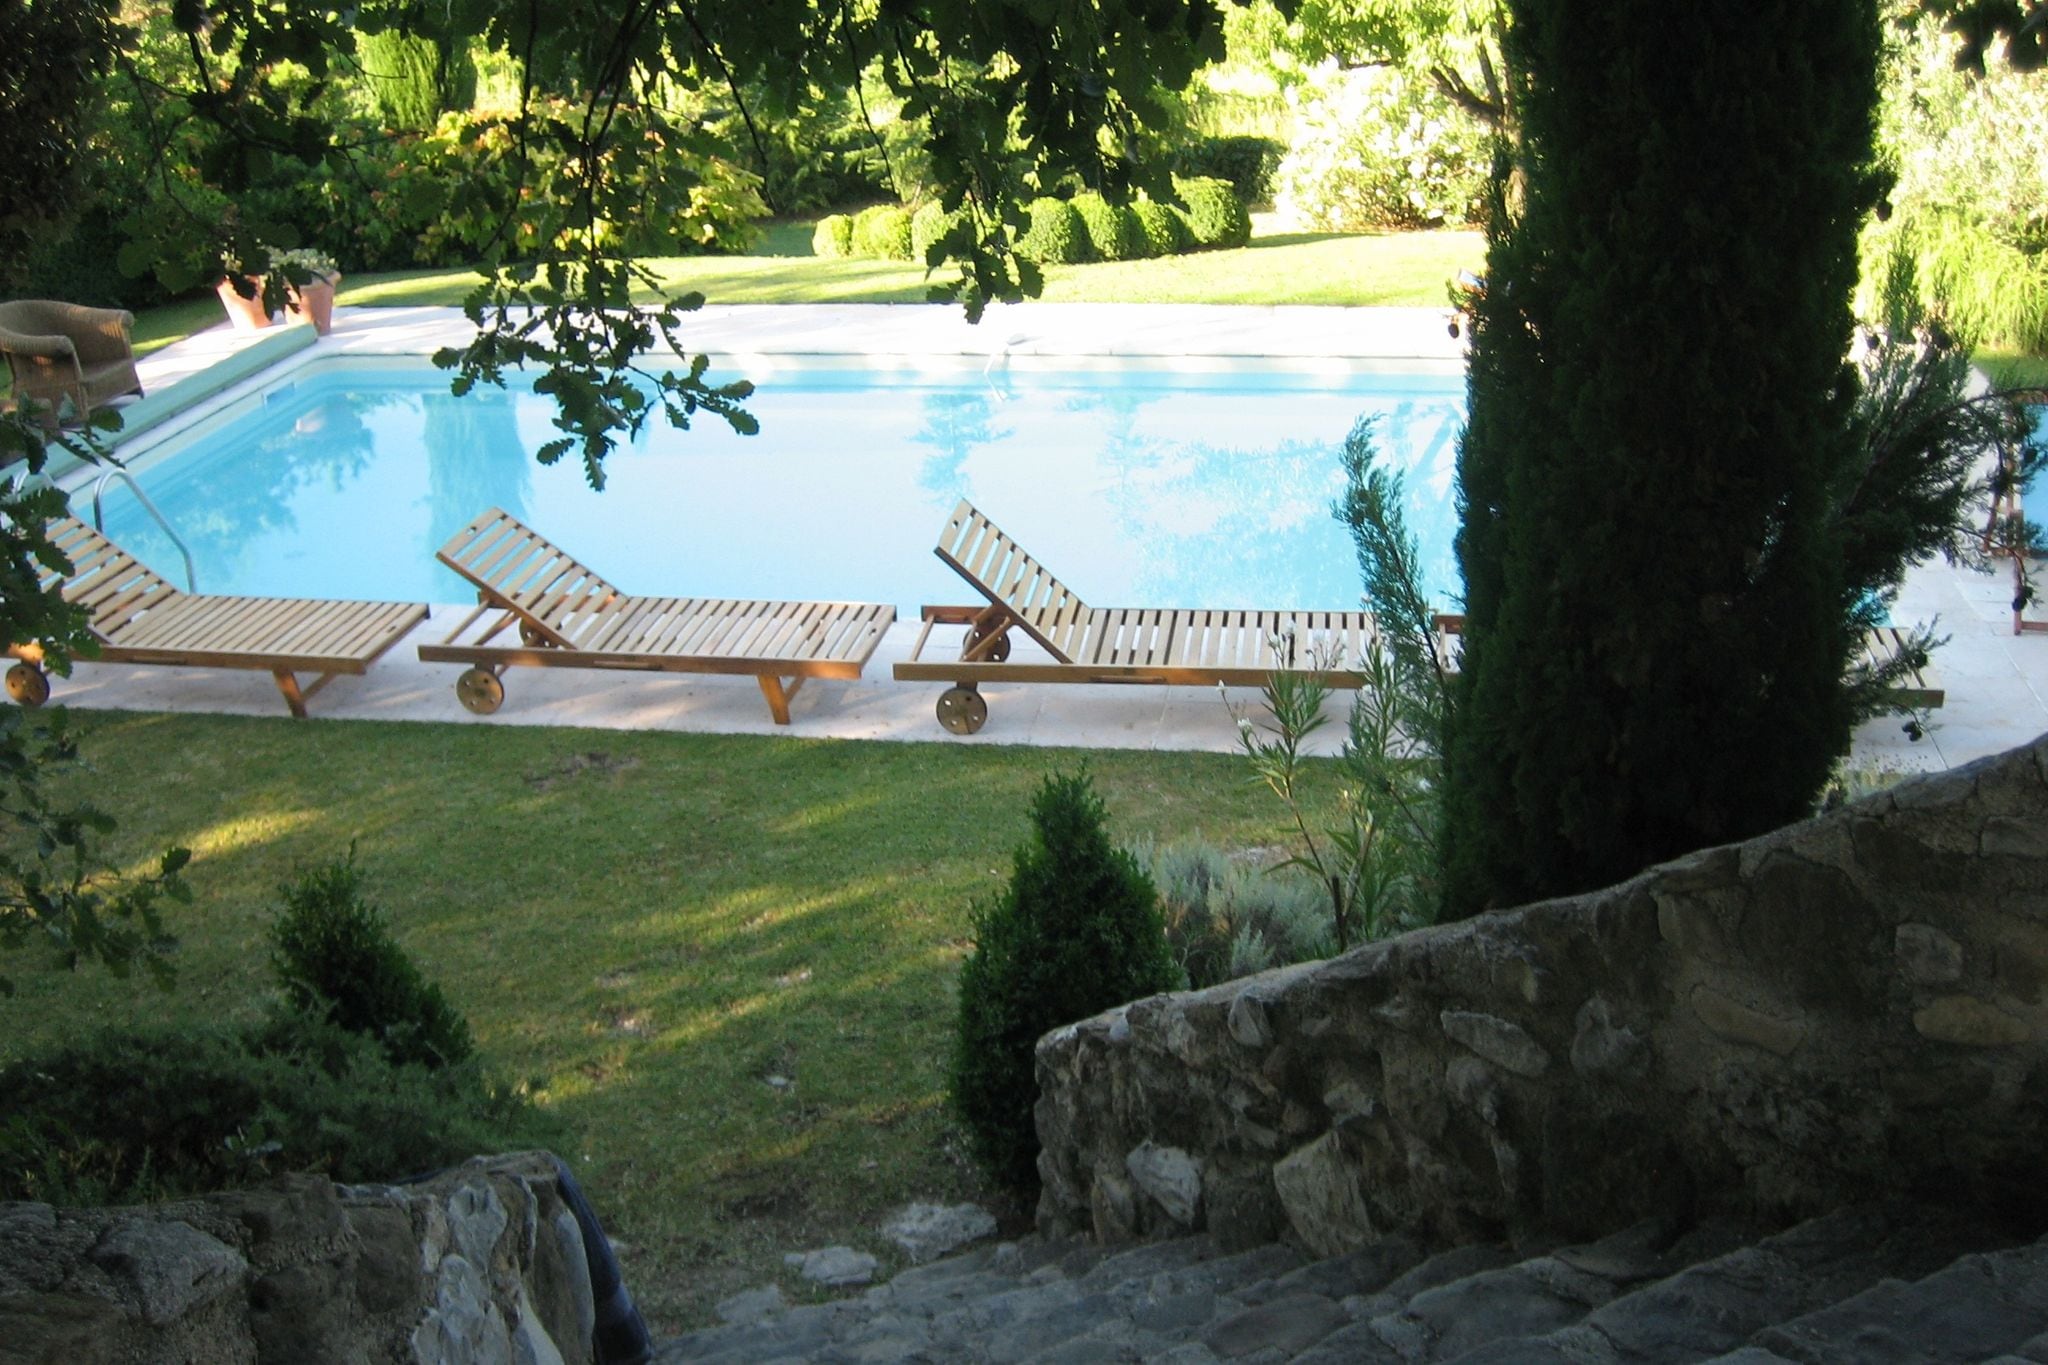 Luxurious countryhouse with Pool in Vaison-la-Romaine